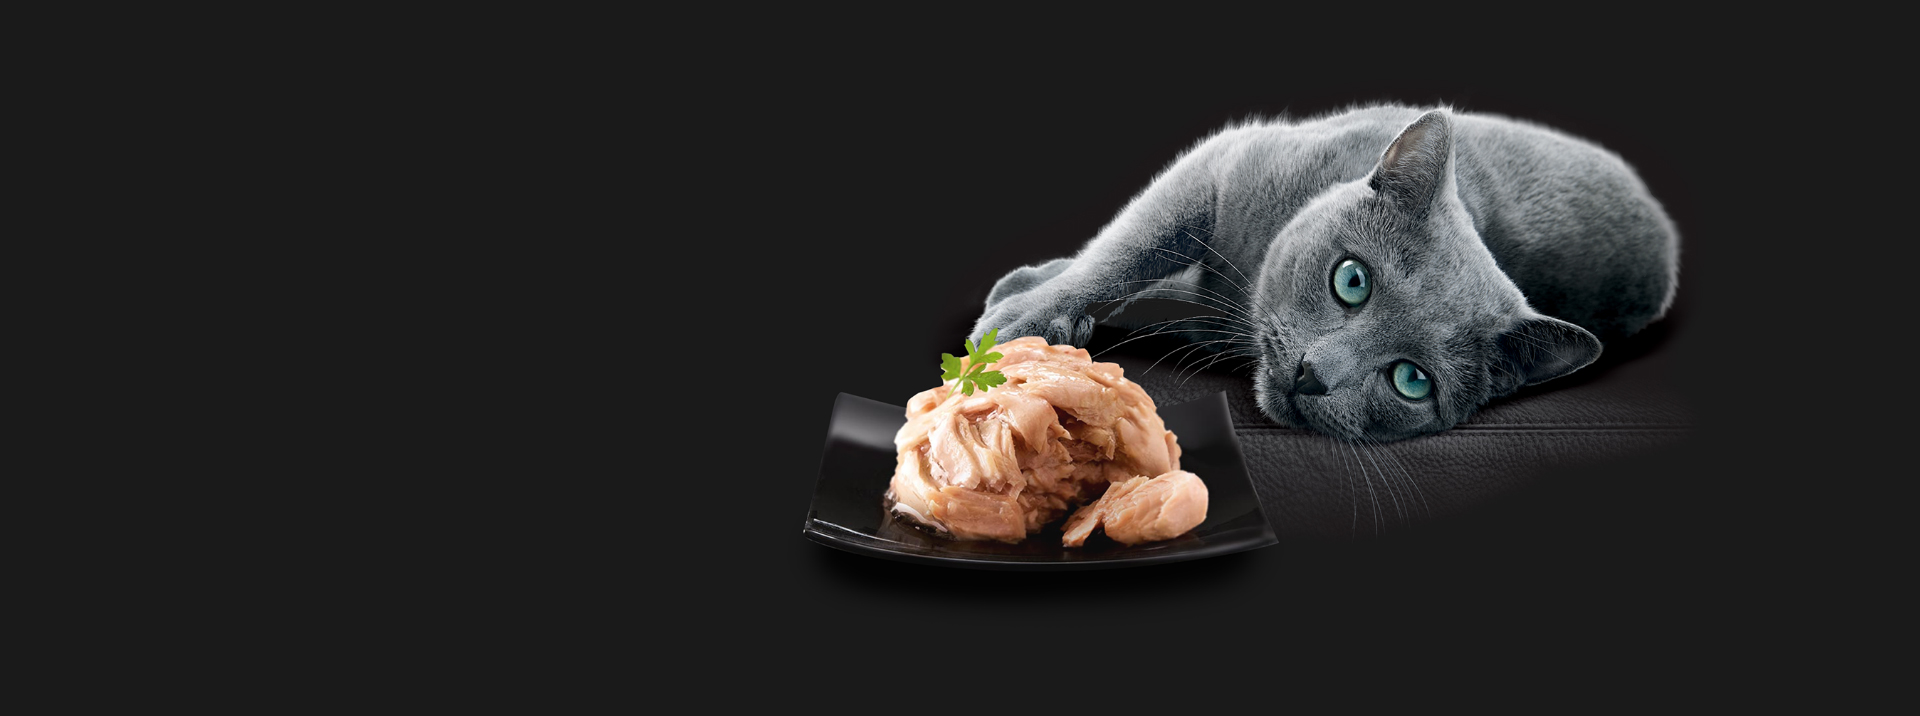 Grey cat lying on a black surface next a bowl of SHEBA® cat food on a plate